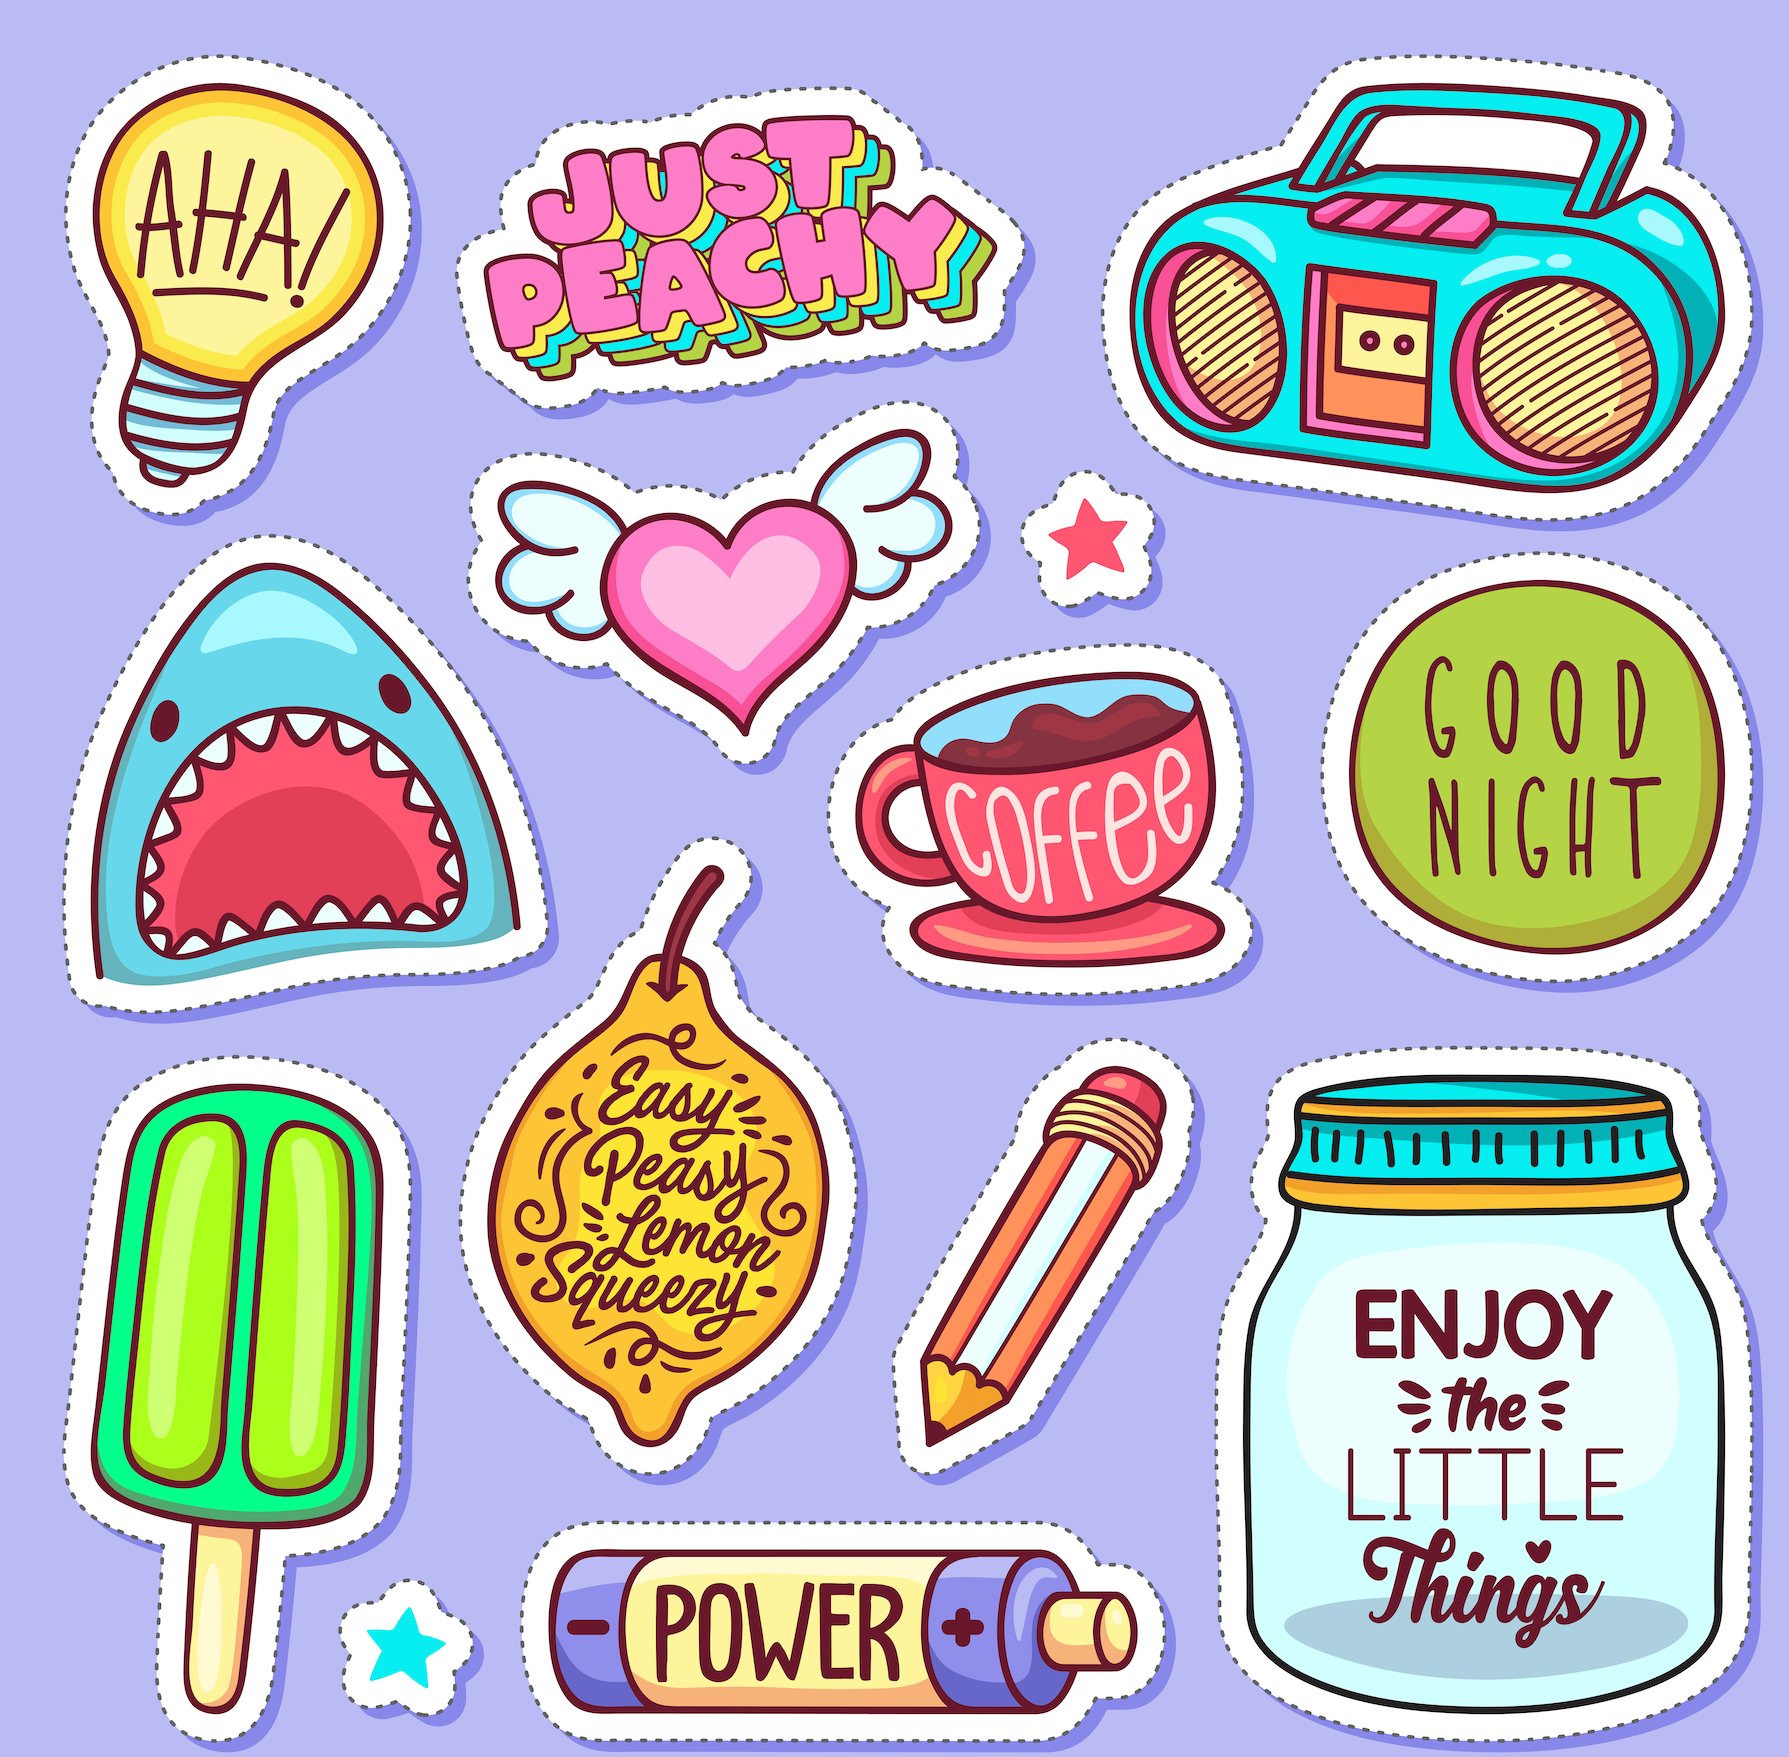 Sheet of 14 Printable Mixed Stickers – PLR Stickers